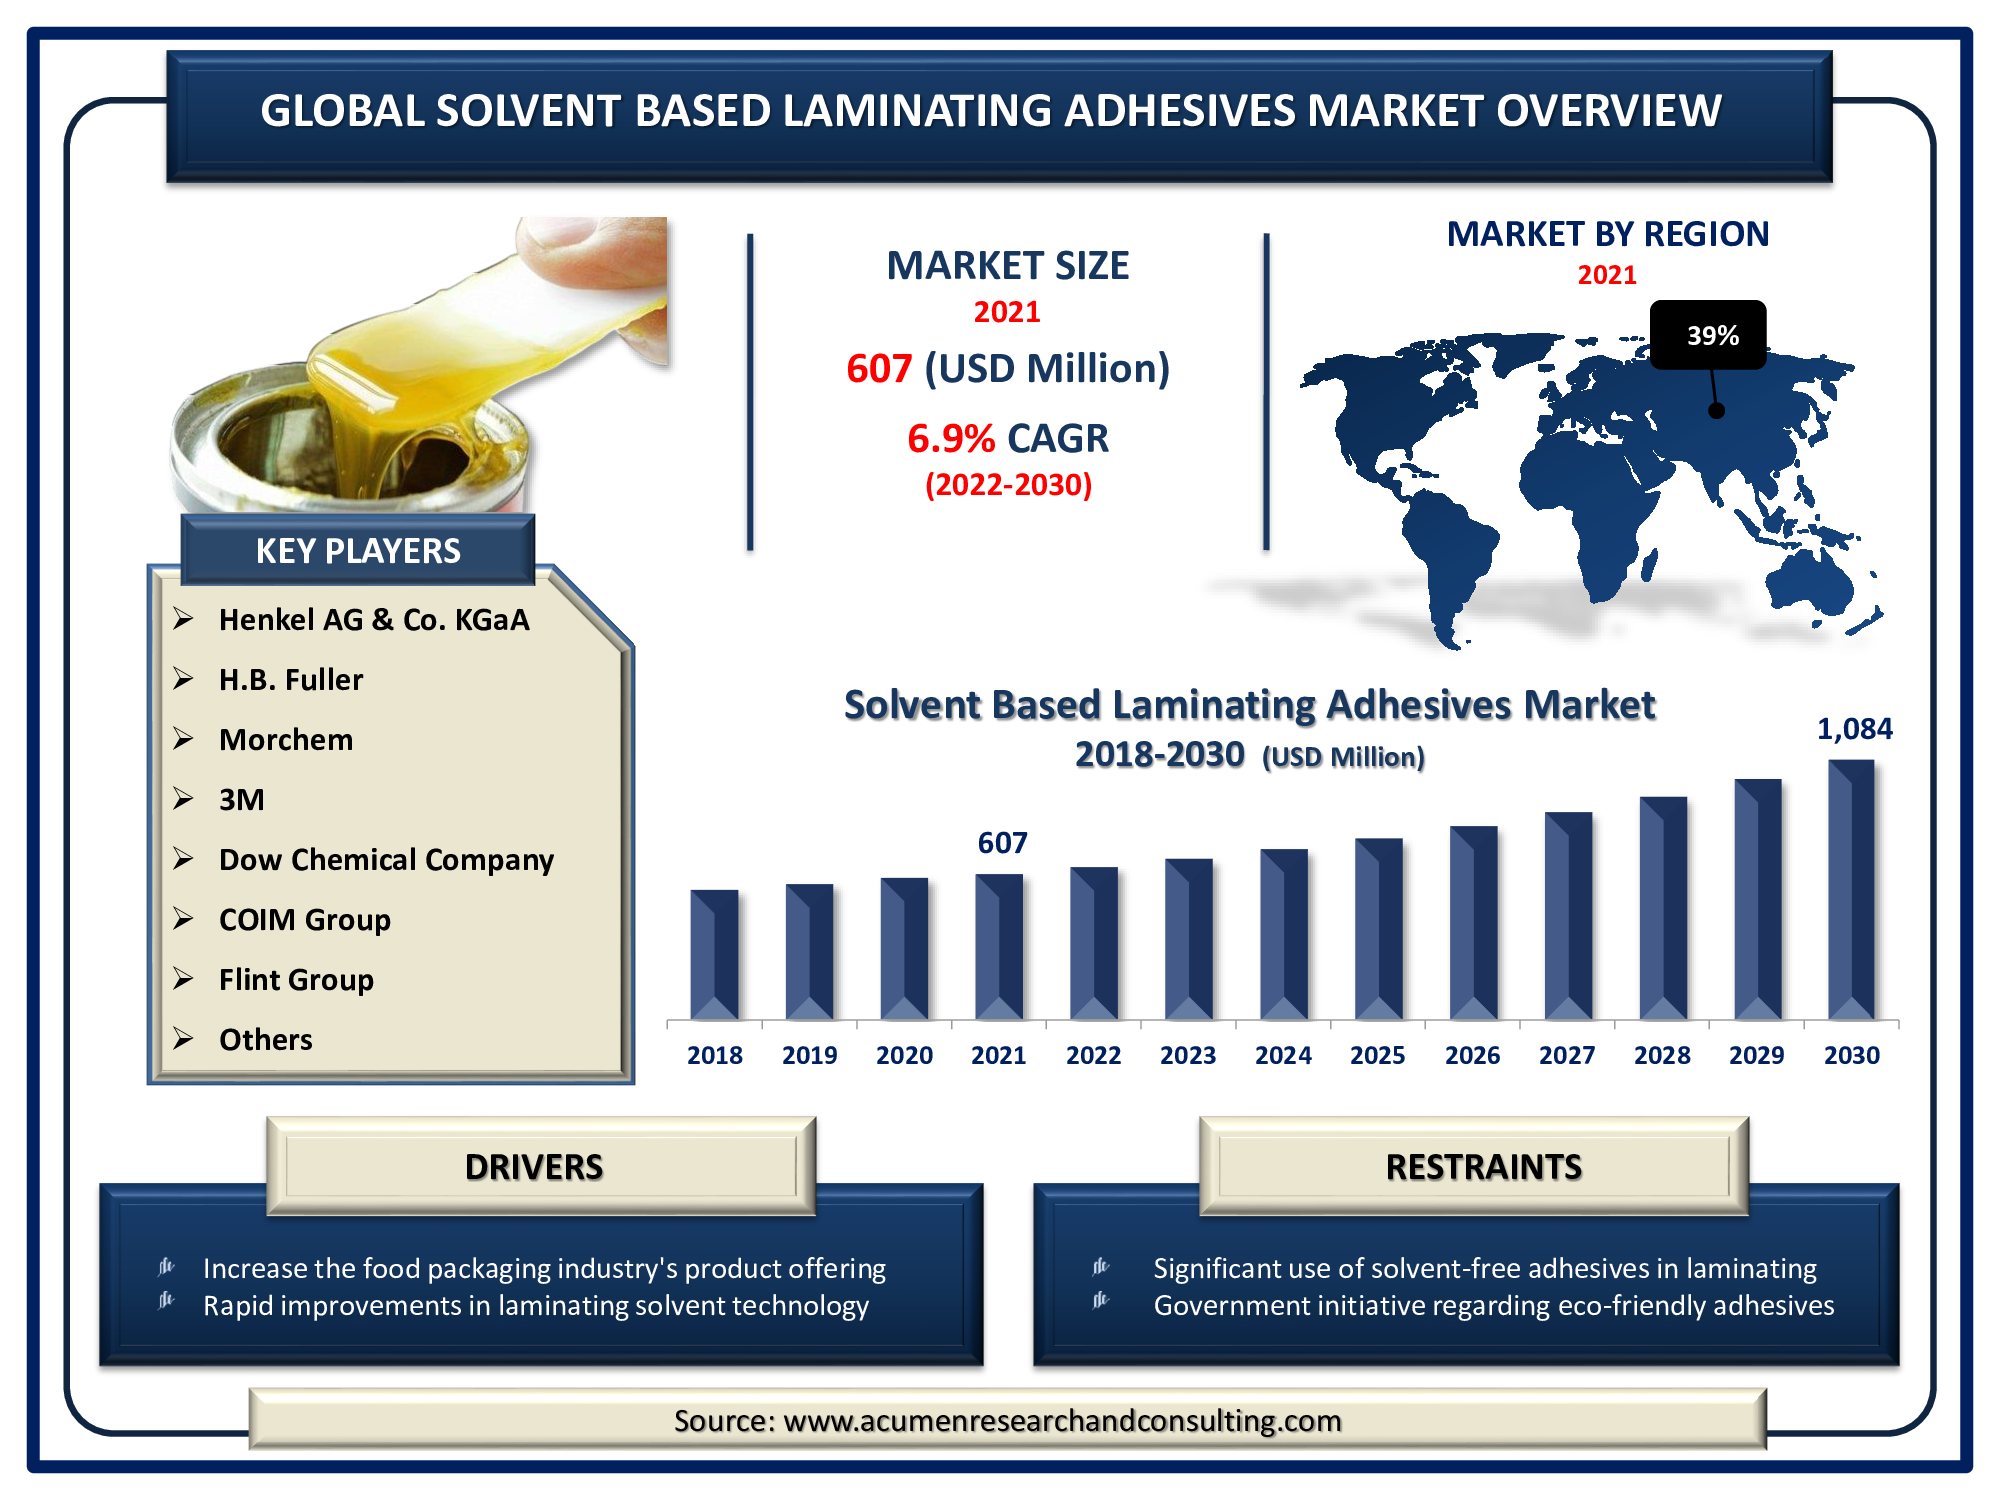 Solvent Based Laminating Adhesives Market is predicted to be worth USD 1,084 Million by 2030, with a CAGR of 6.9%